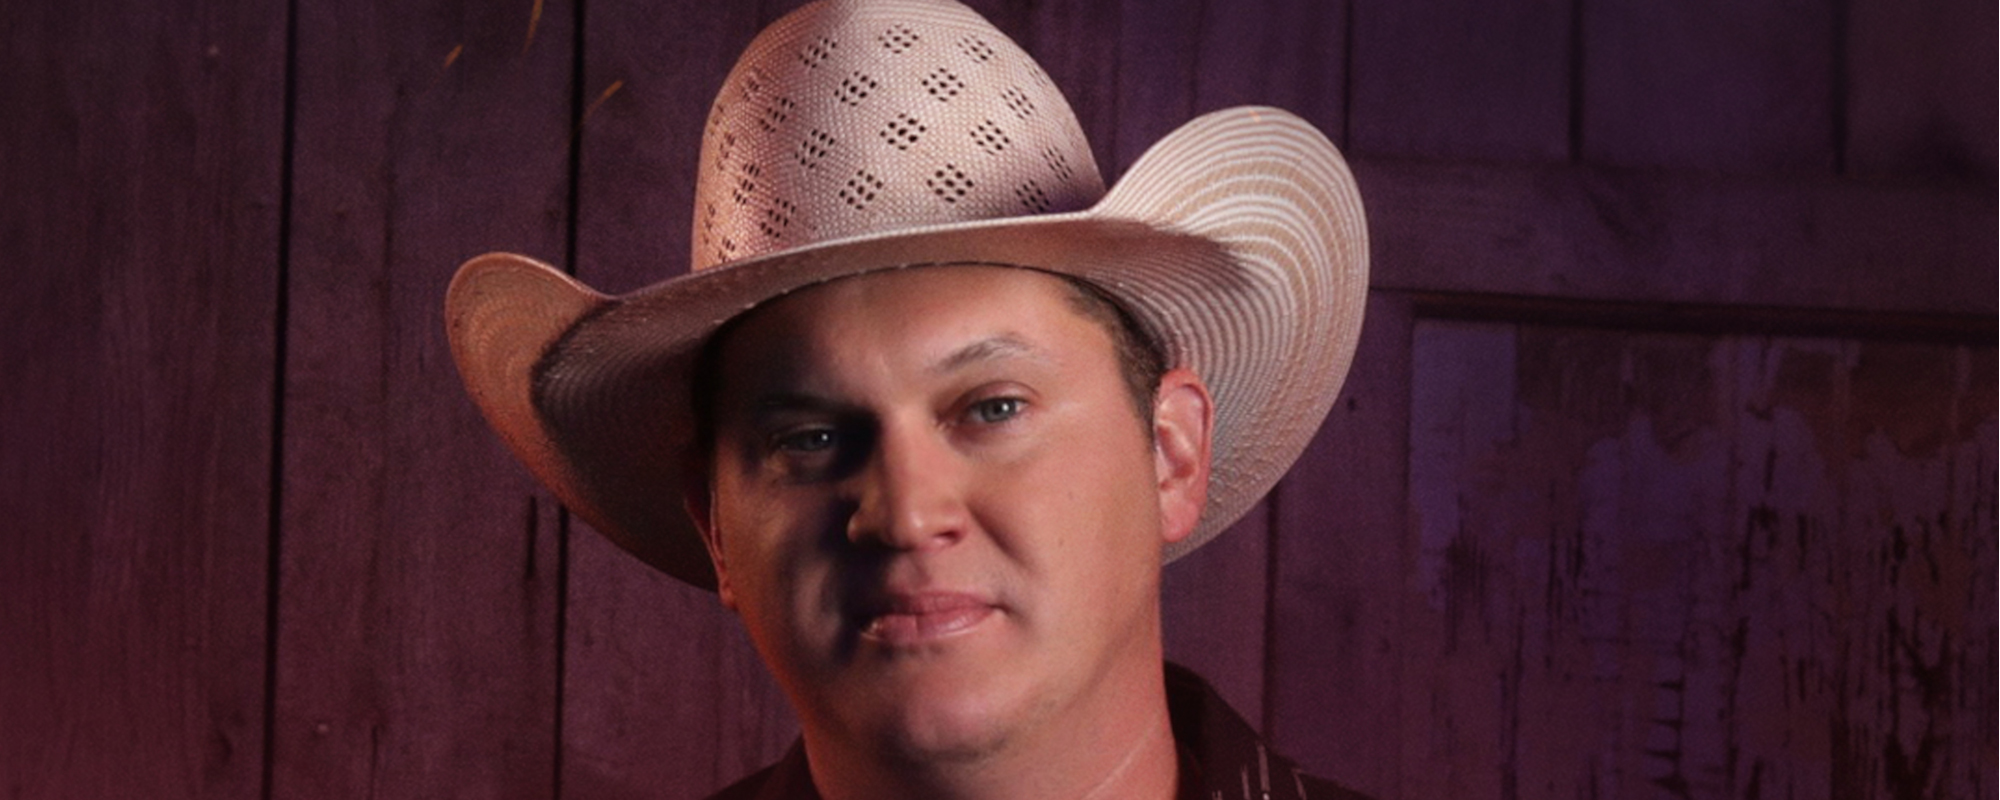 Exclusive First Look: Jon Pardi Performs “Heartache on the Dance Floor” on ‘CMT Campfire Sessions’